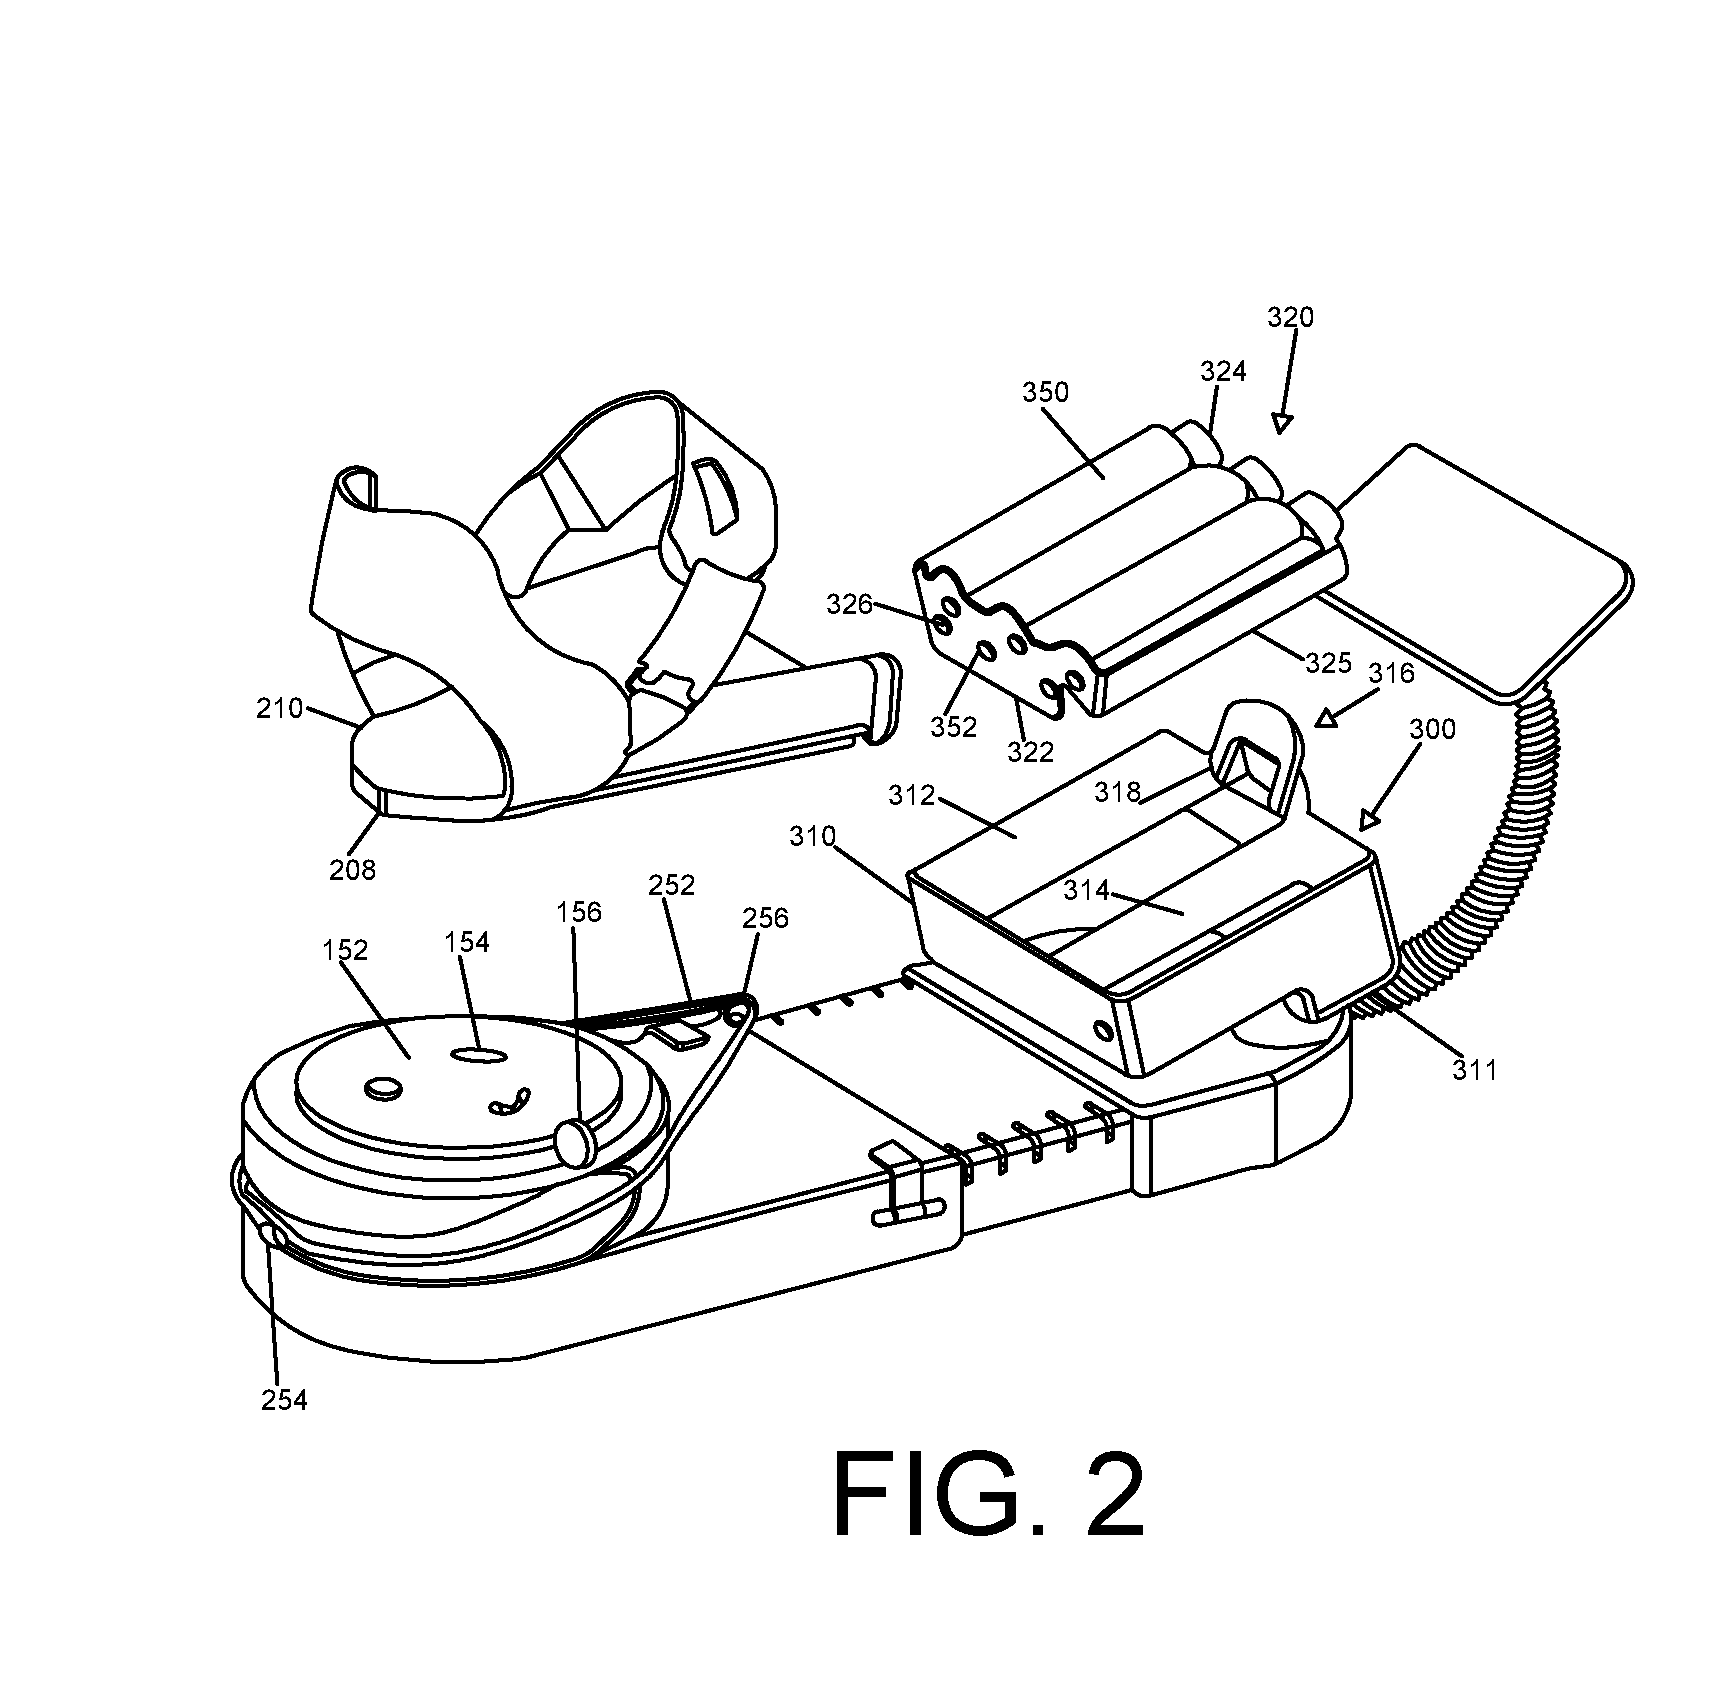 Exercise and therapy device having SPNRED material